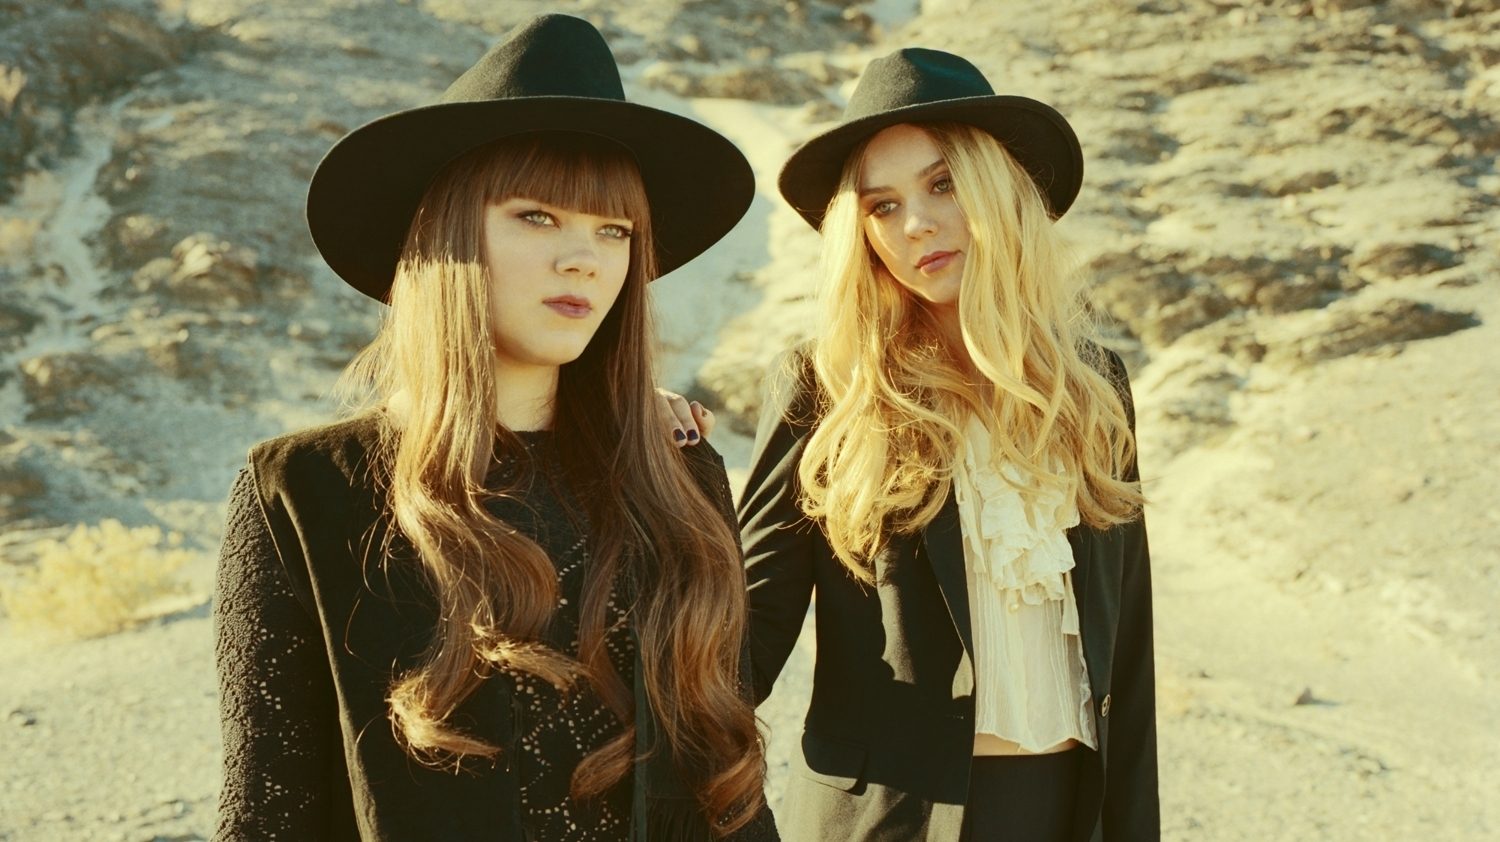 First Aid Kit @ Stubb’s 10/14 (ACL Fest Late Night Show)